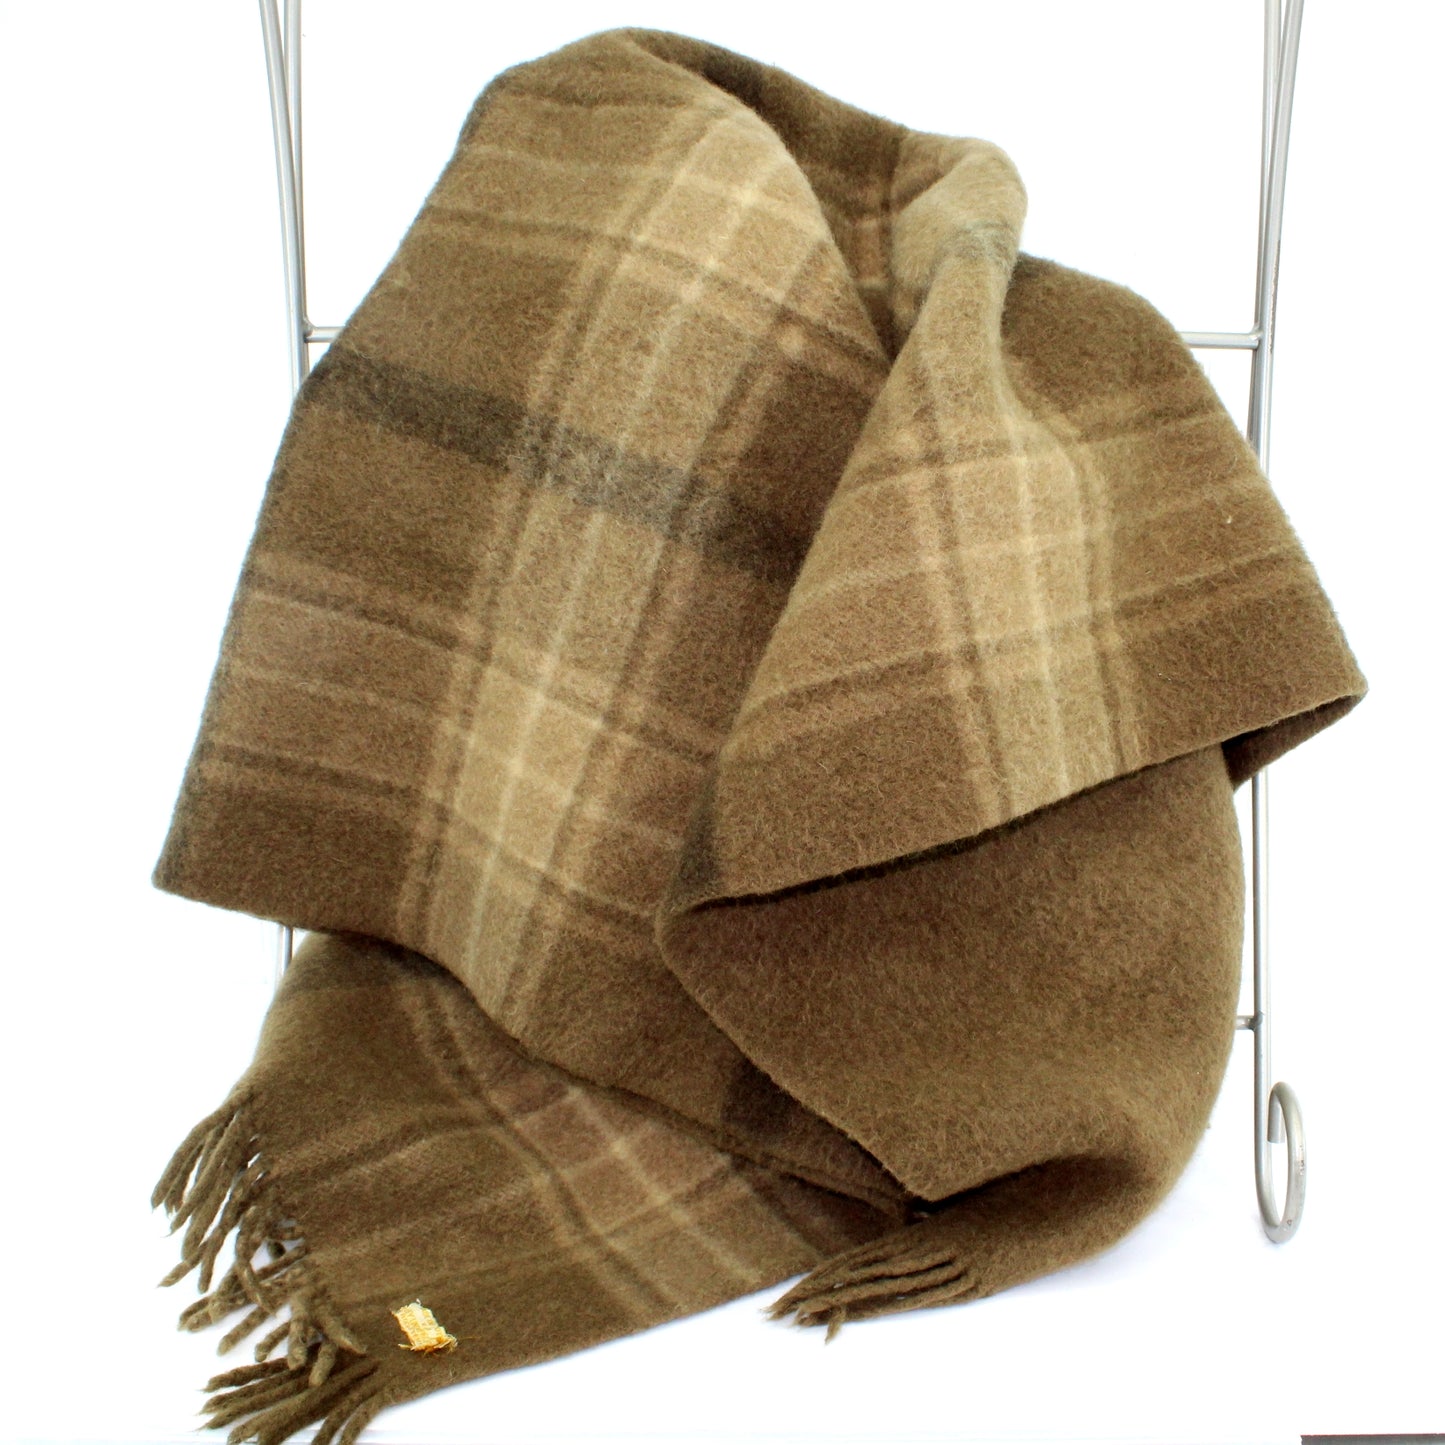 Sibley Lindsay Curr Rochester NY Wool Throw Blanket Very Heavy Reversible Brown Plaid to Solid shades of brown plaid and solid